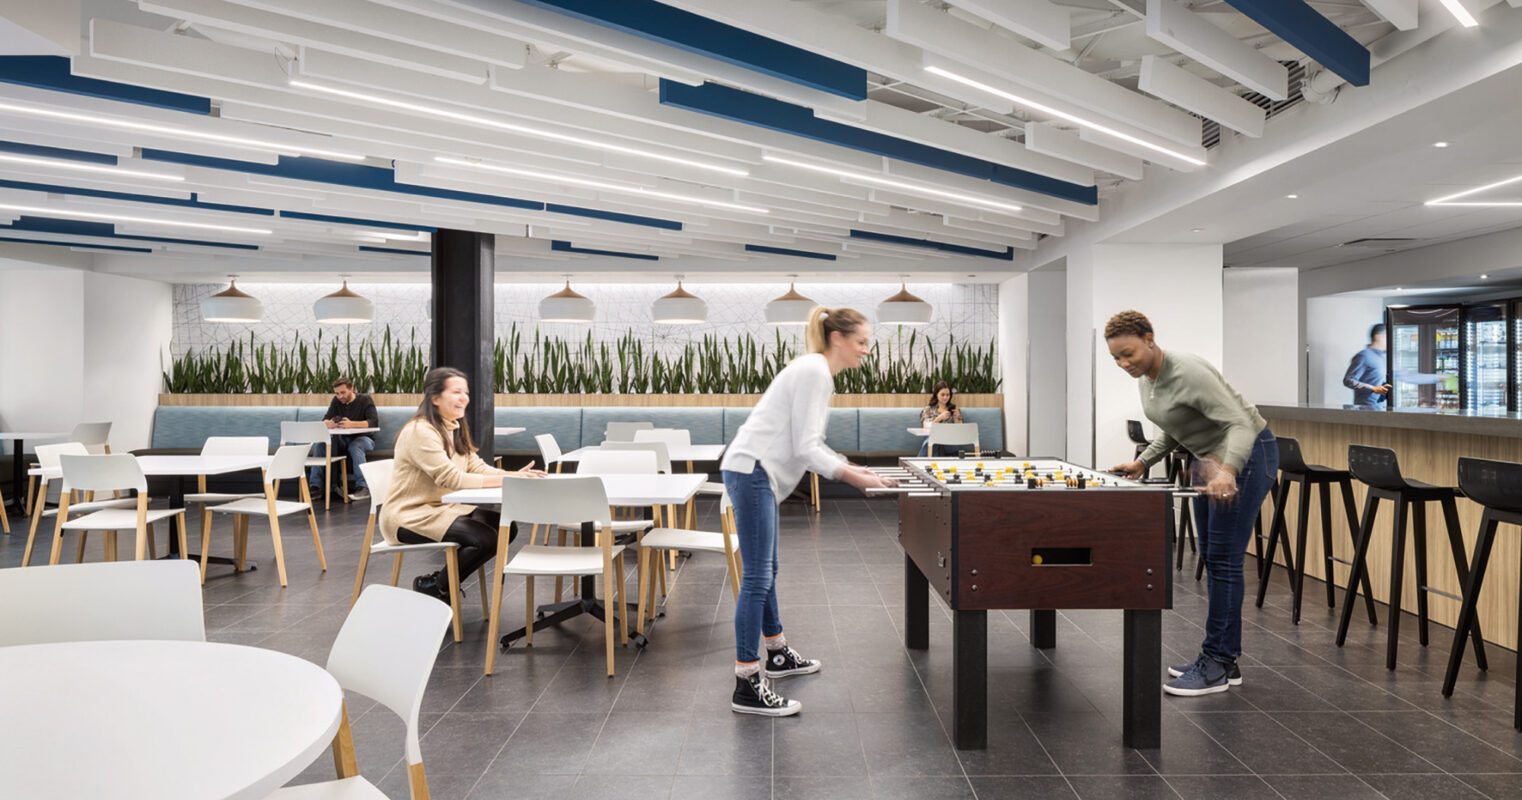 Open-plan office recreation area with contemporary aesthetics, featuring streamlined white tables, high stools, and suspended linear lighting. Two individuals engage in a game of foosball, augmenting the space's casual and collaborative atmosphere. Floor-to-ceiling windows invite natural light, enhancing the plants' vibrant green against the neutral palette.